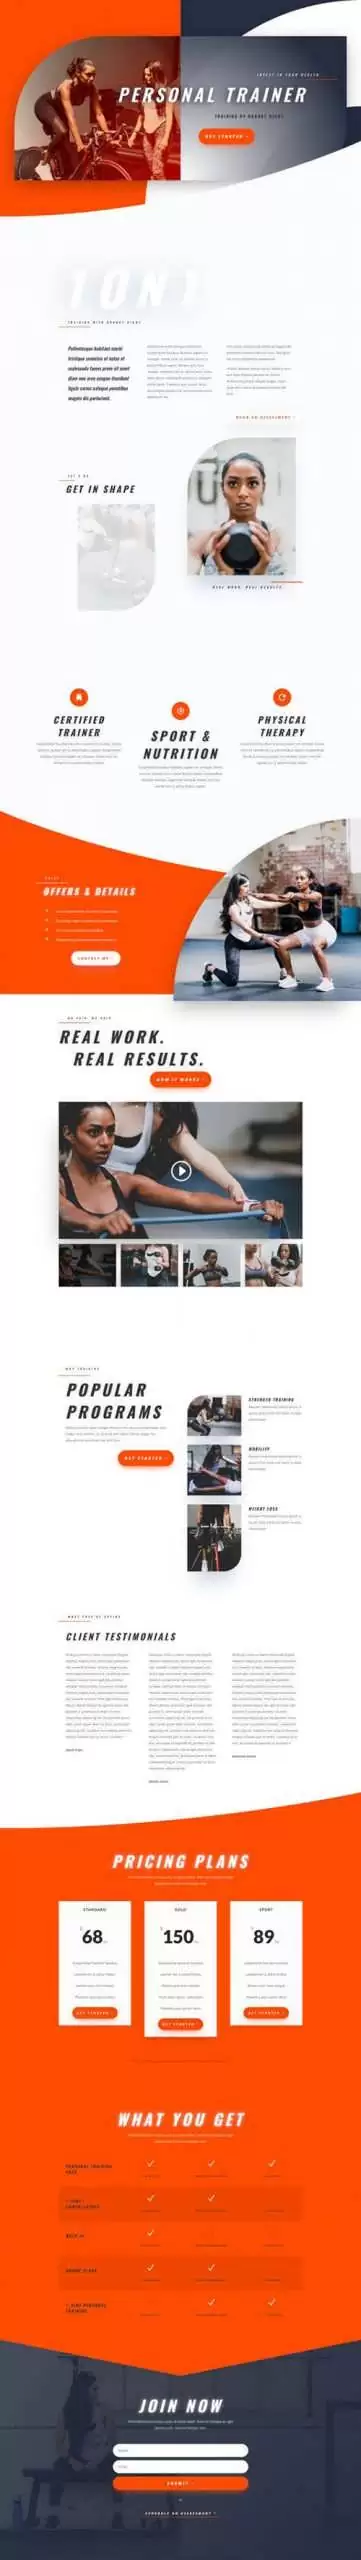 personal trainer landing page scaled